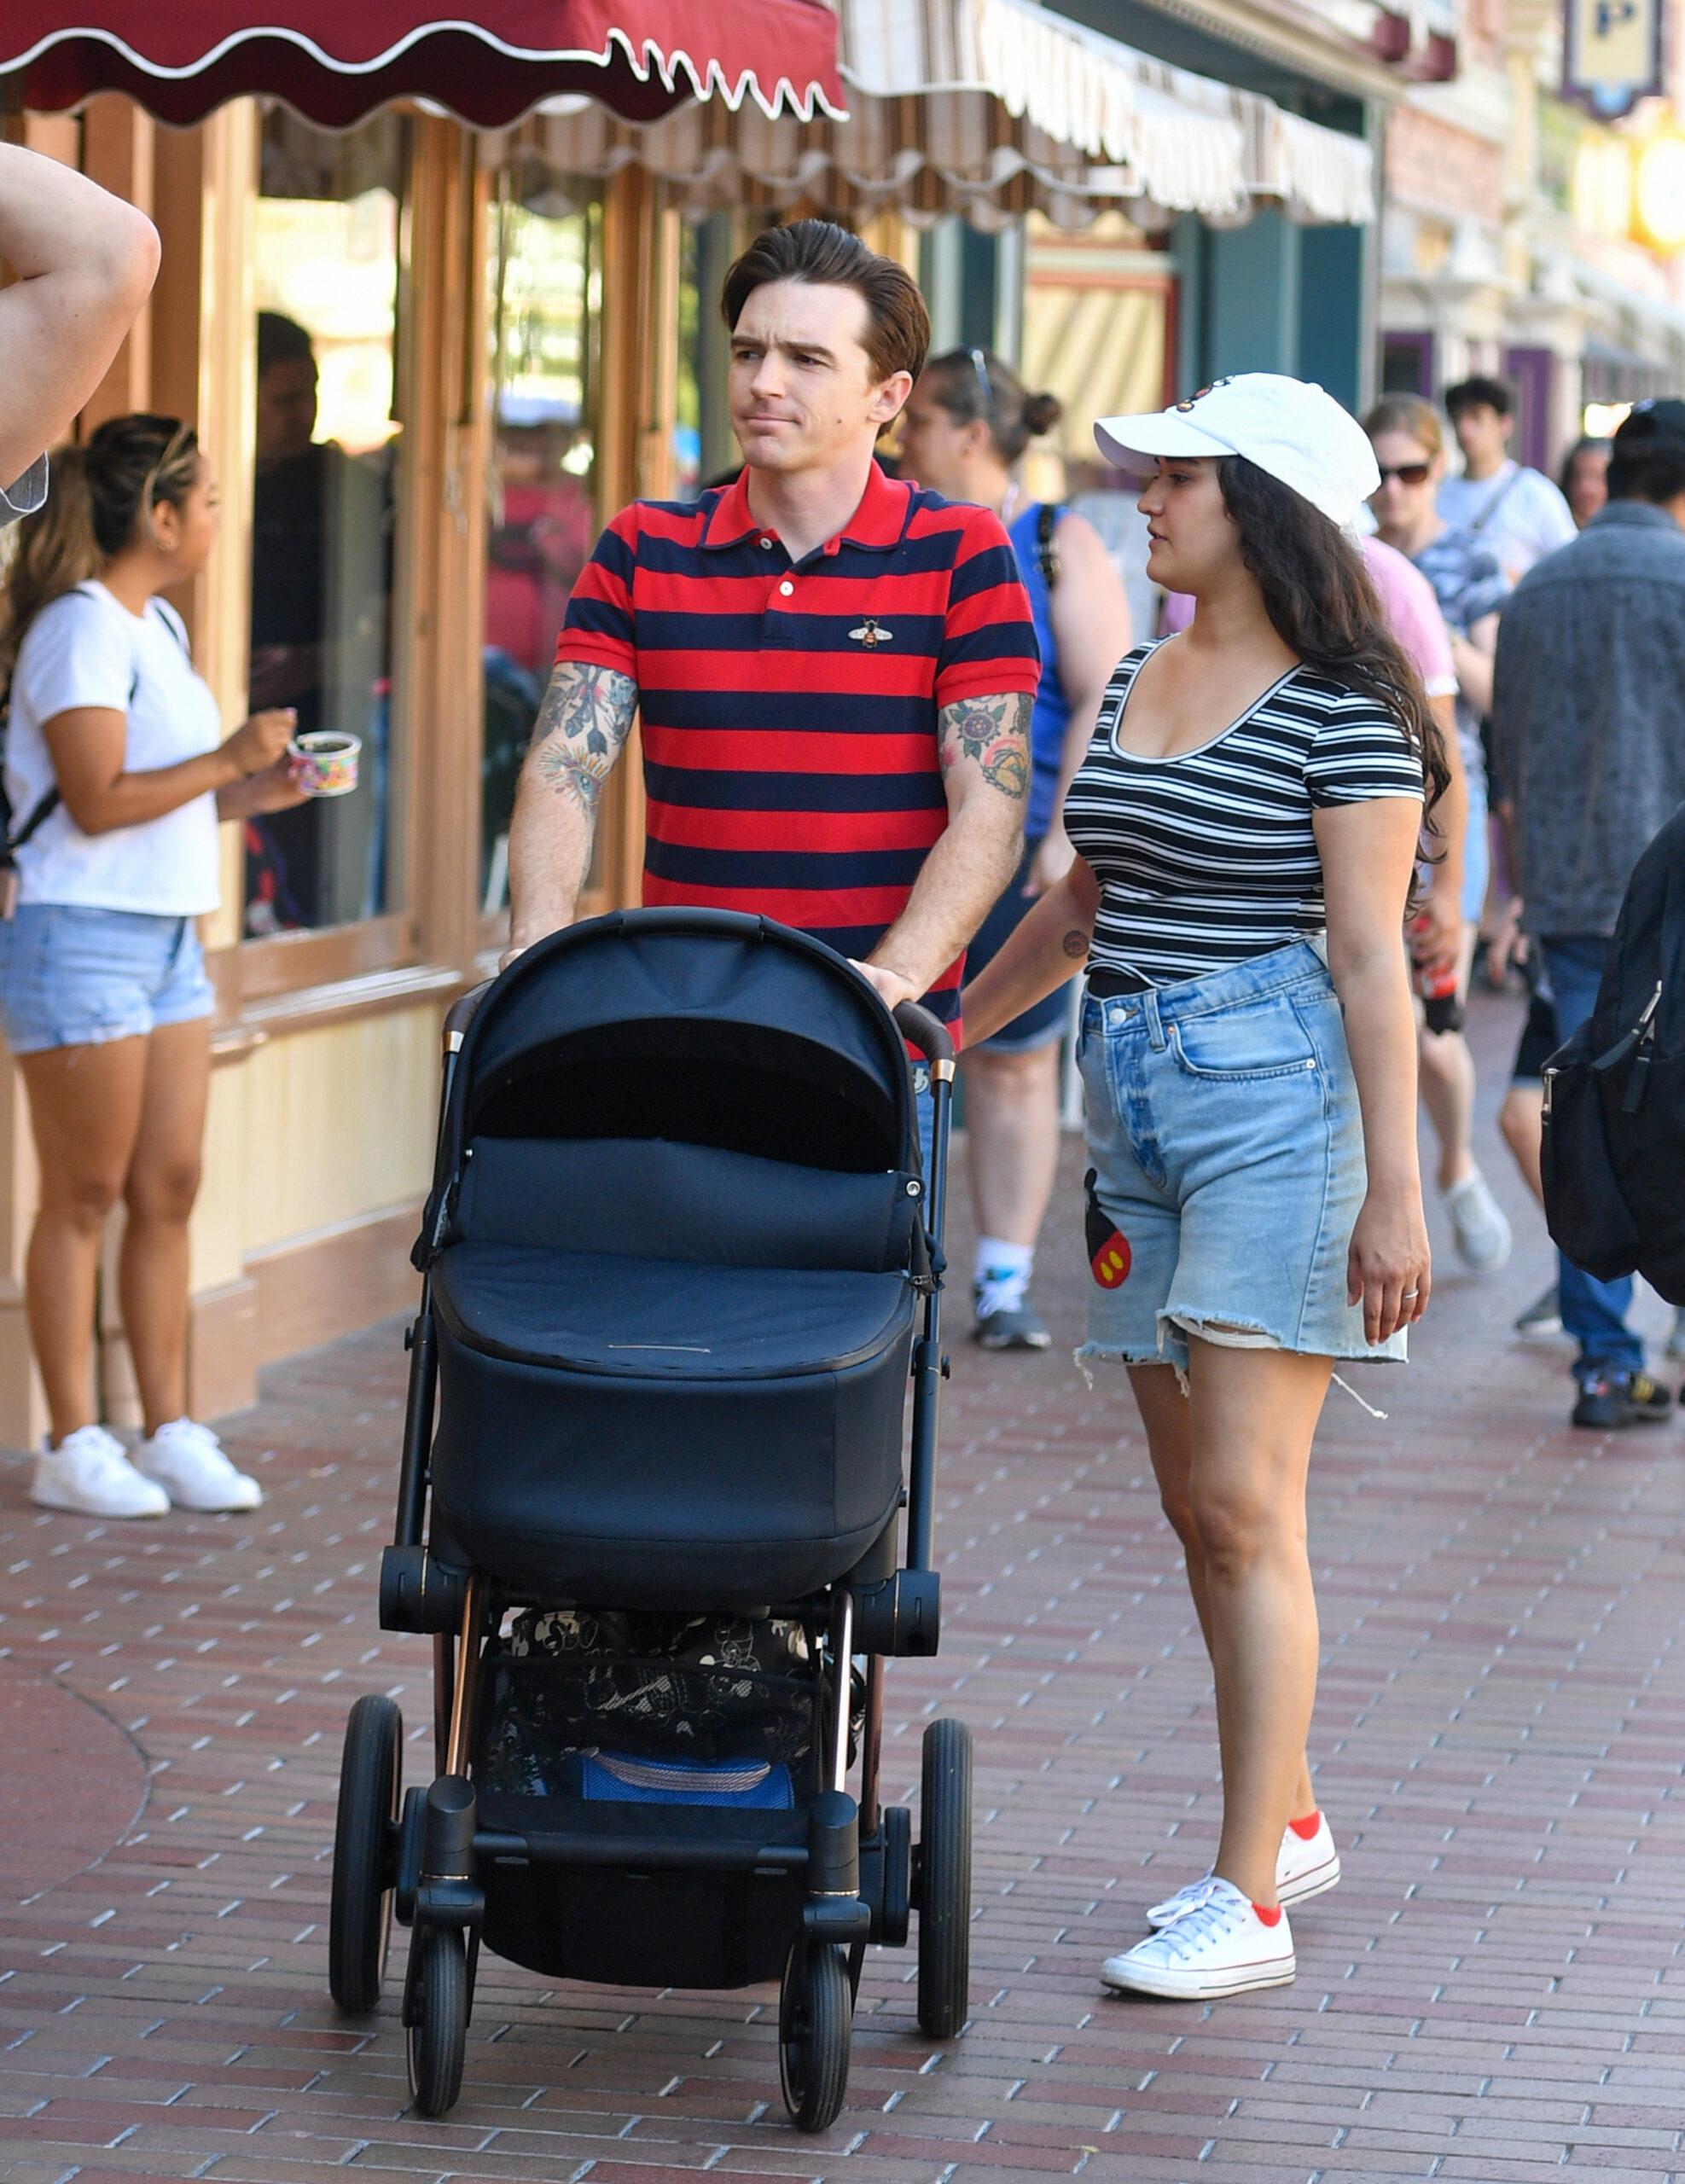 Drake Bell is seen for the first time since pleading guilty to child endangerment with a women who is believed to be his wife and a baby at Disneyland The actor was seen celebrating his 35th birthday with his little family putting his legal woes behind